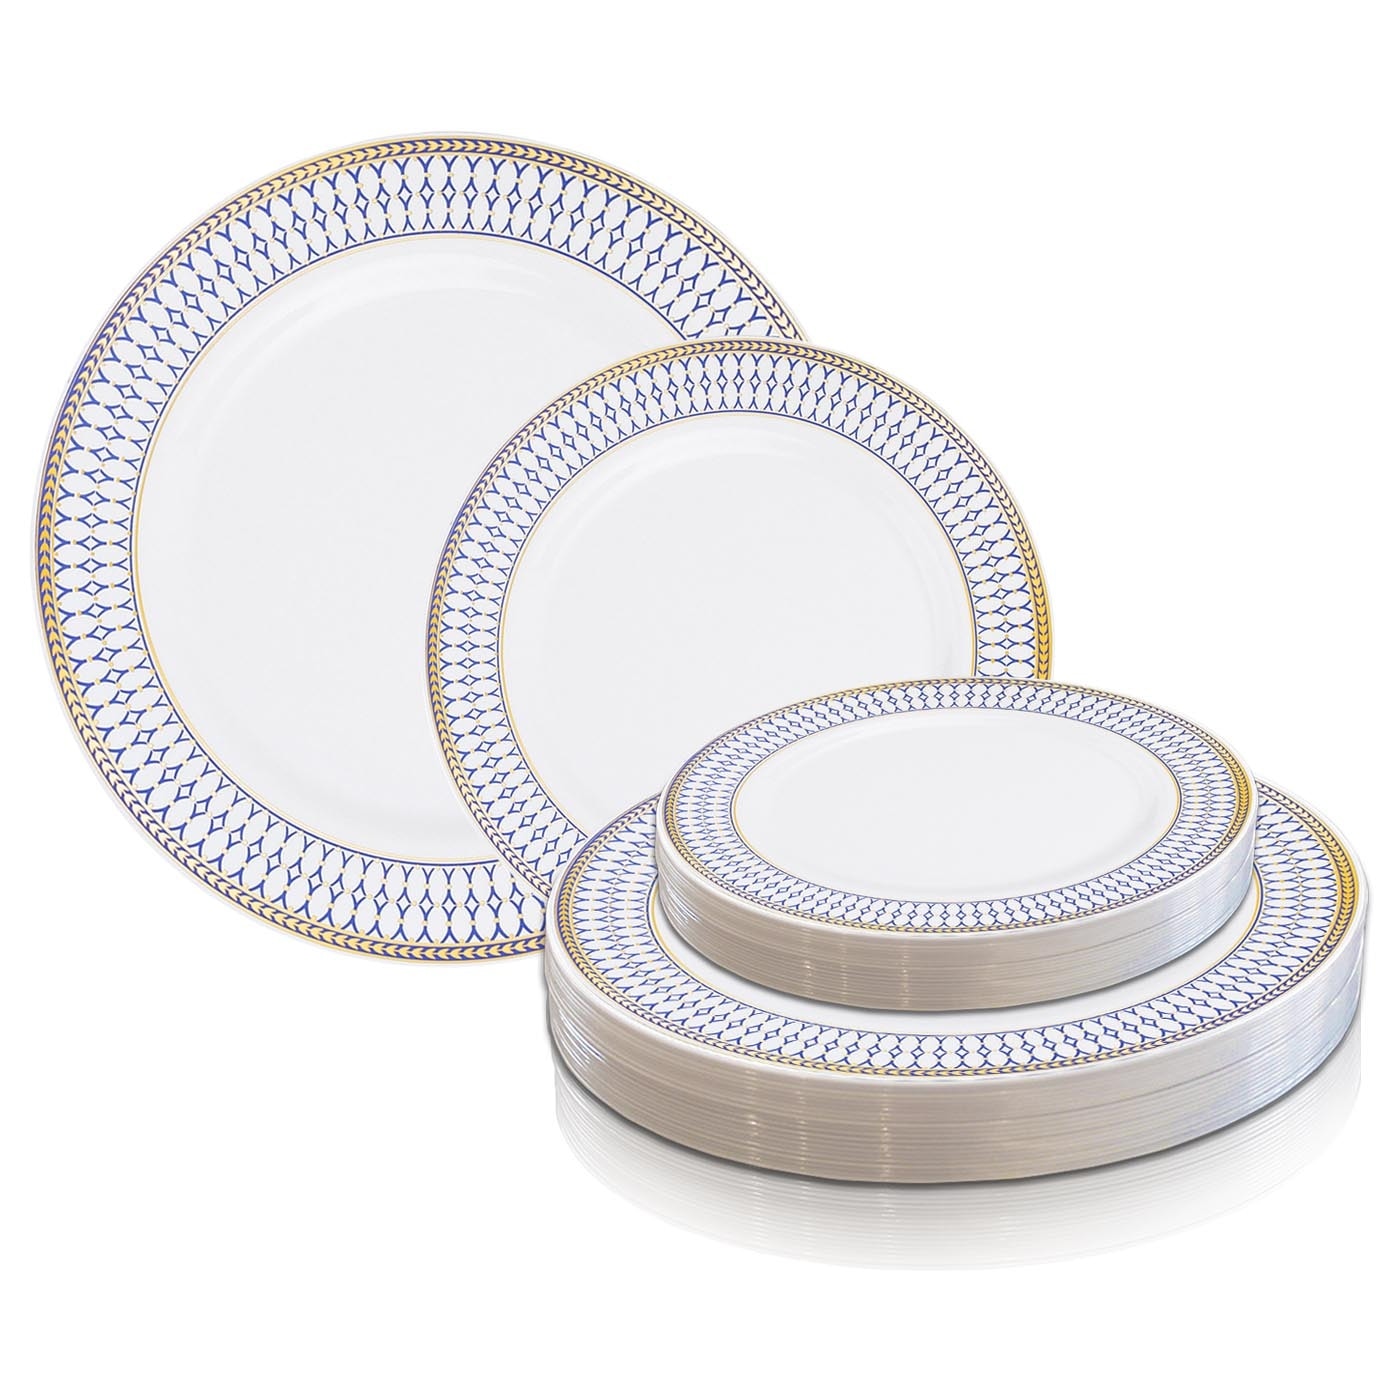 Elegant Disposable Plastic Dinnerware Set for 60 Guests Fancy White with Silver Hammered Rim Dinner Plates Birthday Party & All Occasions Silverware Set & Cups For Wedding Dessert Salad Plates 